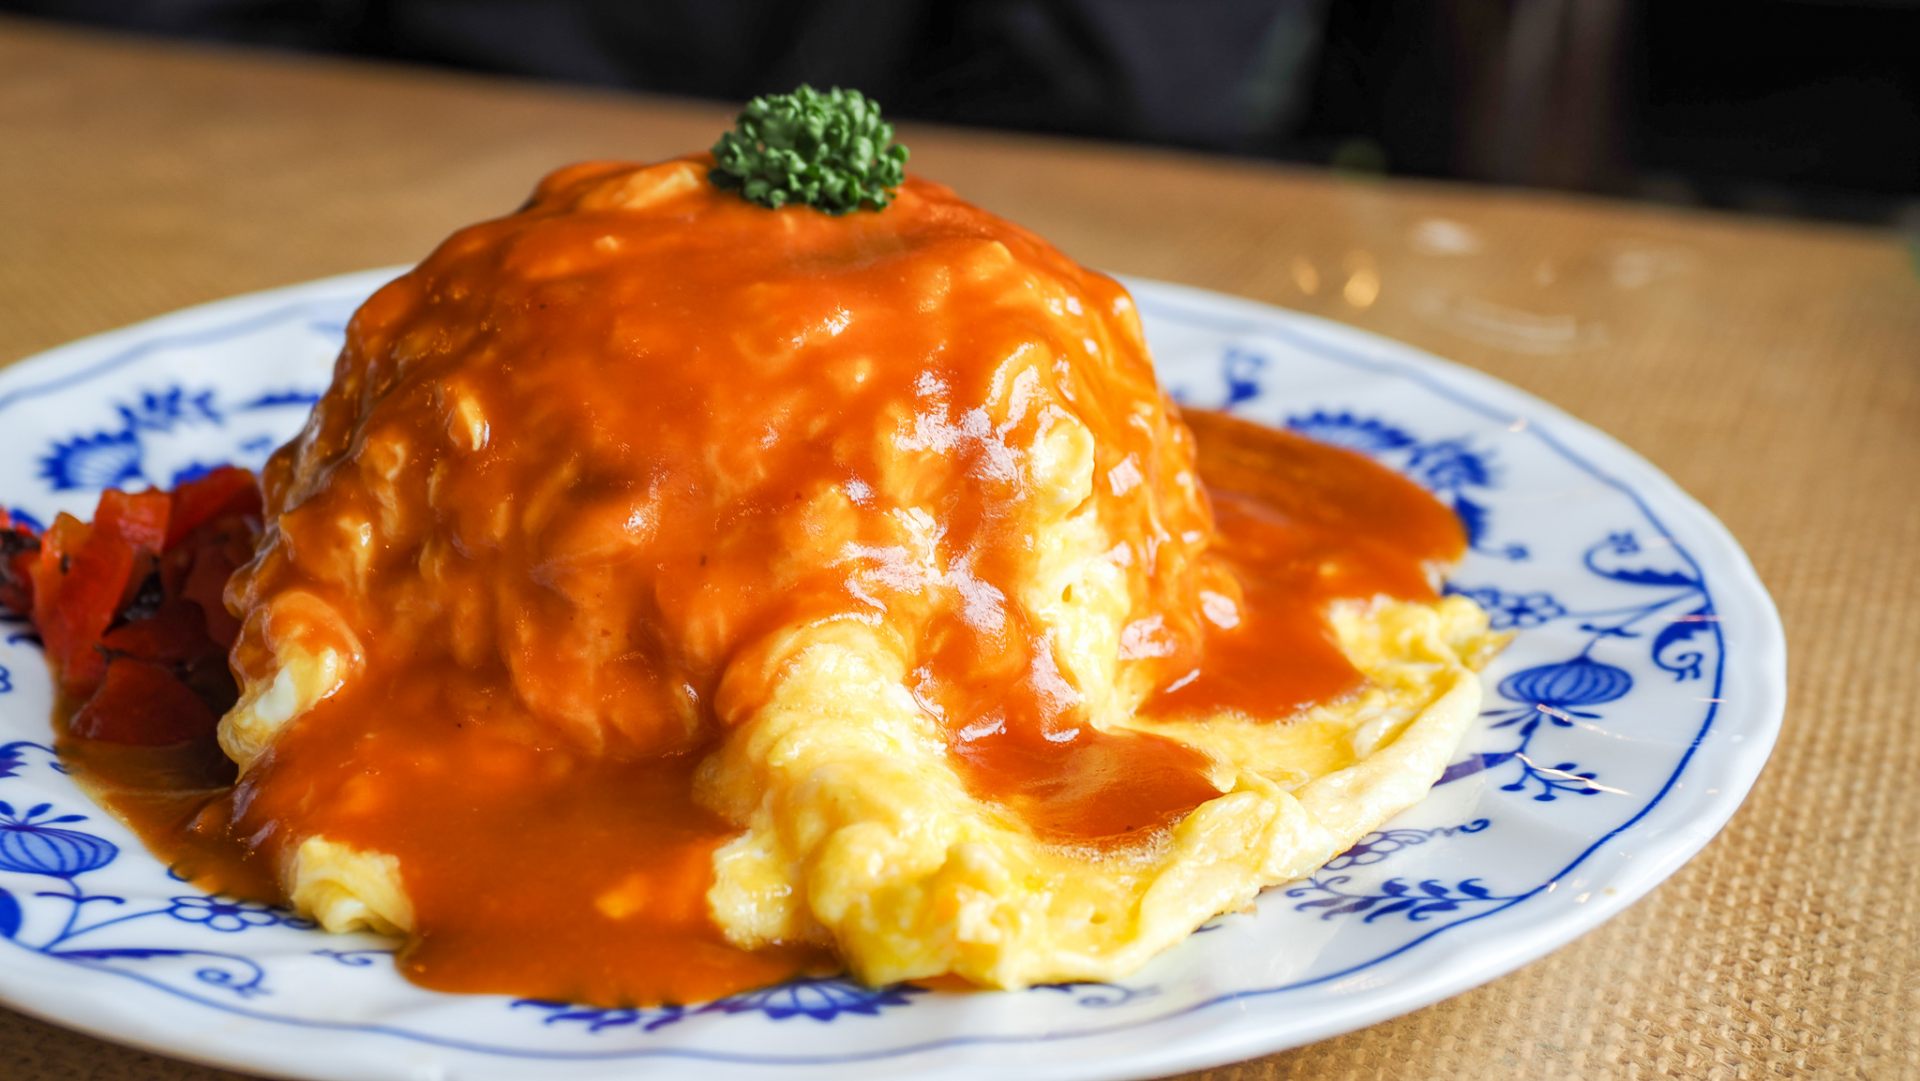 Omu rice that is an omelet with a filling of ketchup-seasoned fried rice